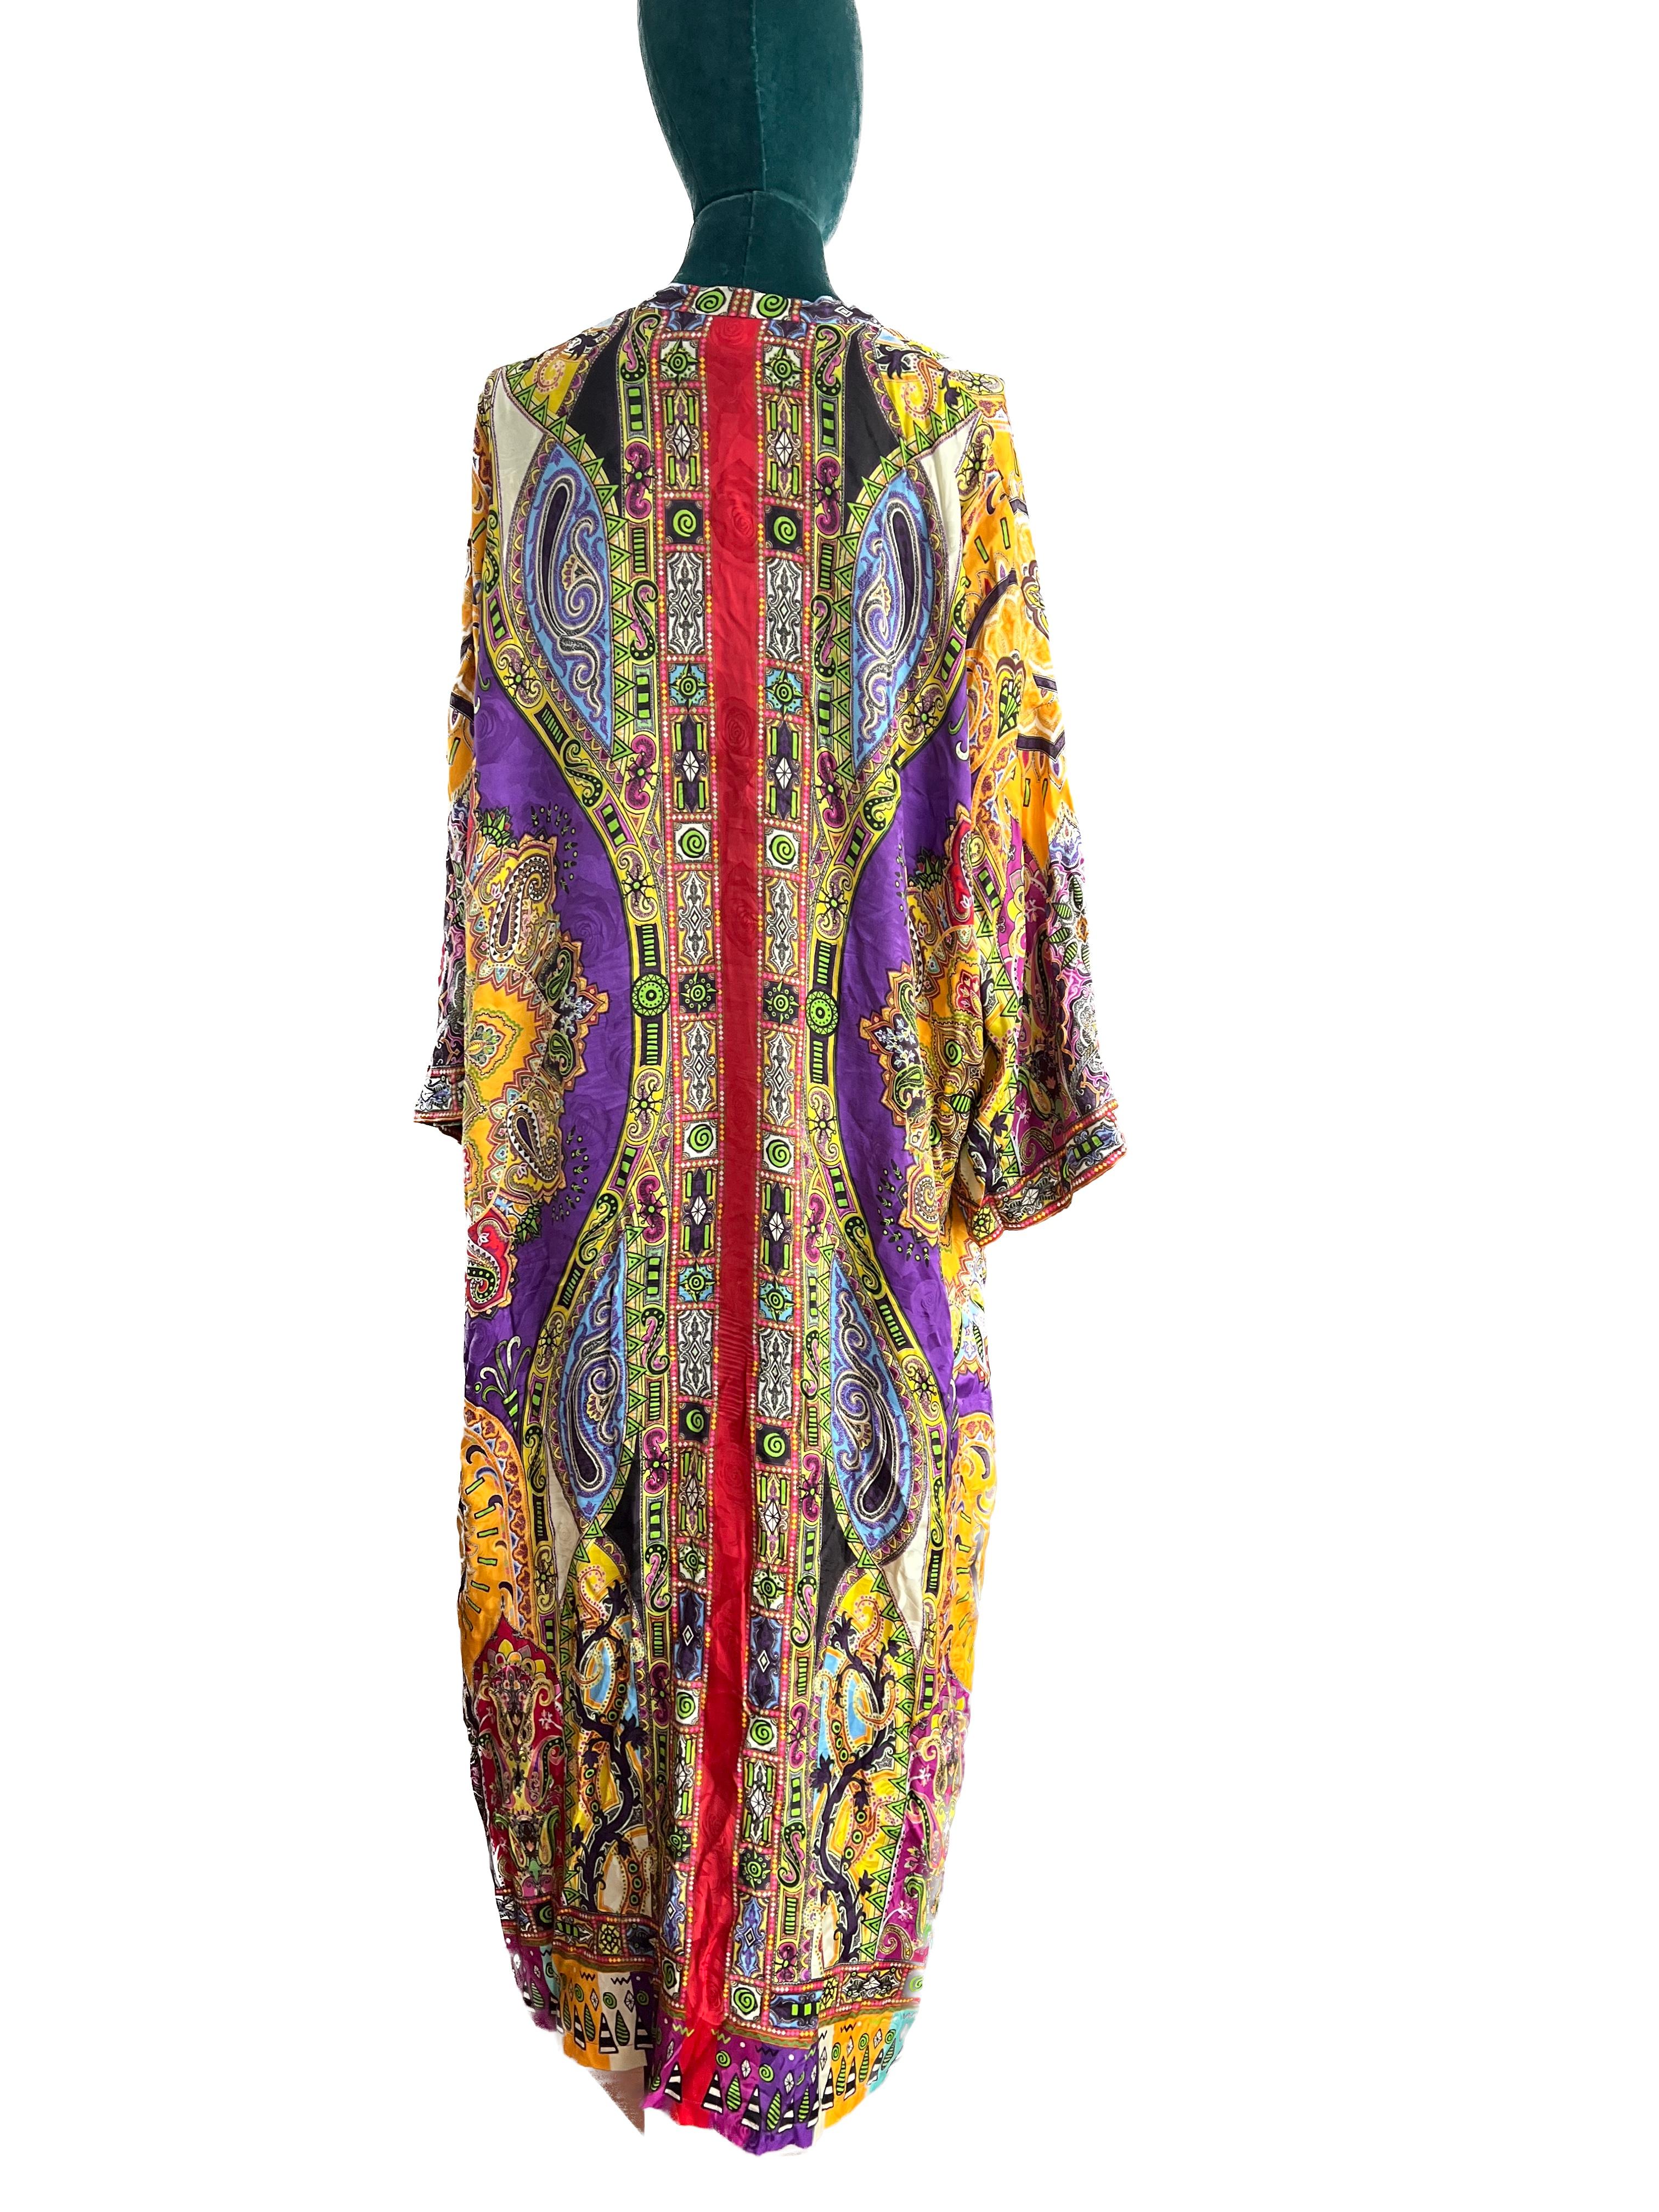 Etro Paisley Kaftan  In Good Condition For Sale In Toronto, CA